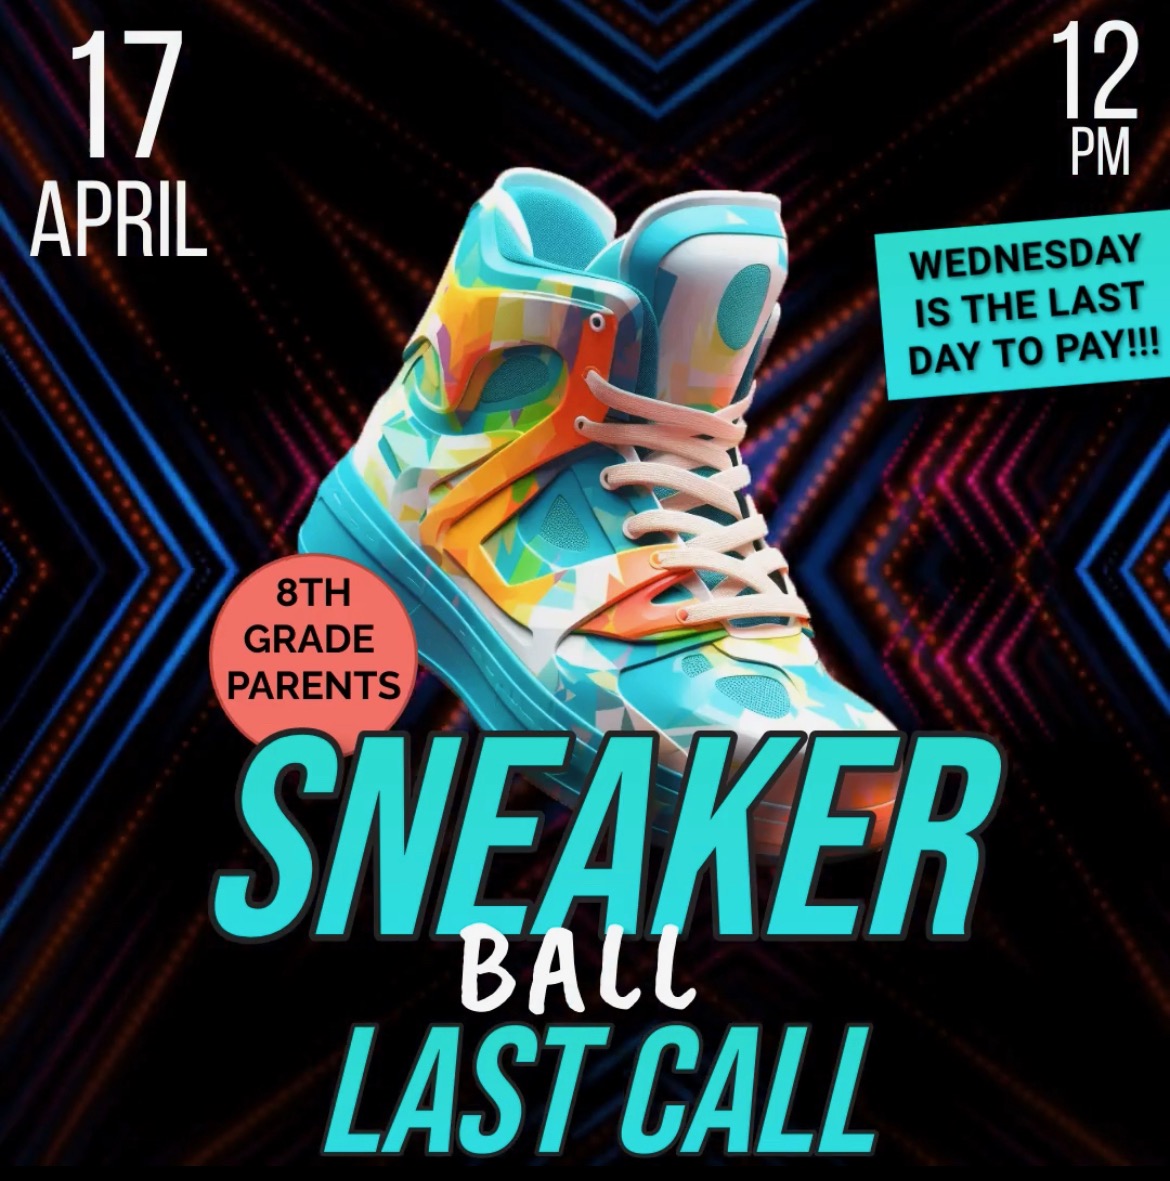 Last call for the Sneaker Ball!! 8th grade students, if you plan on attending, now is your chance! Tomorrow is the last day to pay. ALL payments MUST be in my 12 PM (Noon) tomorrow. #sneakerball #lastcall #8thgrade #students #parents #teachers #middleschool #minormiddle @JEFCOED